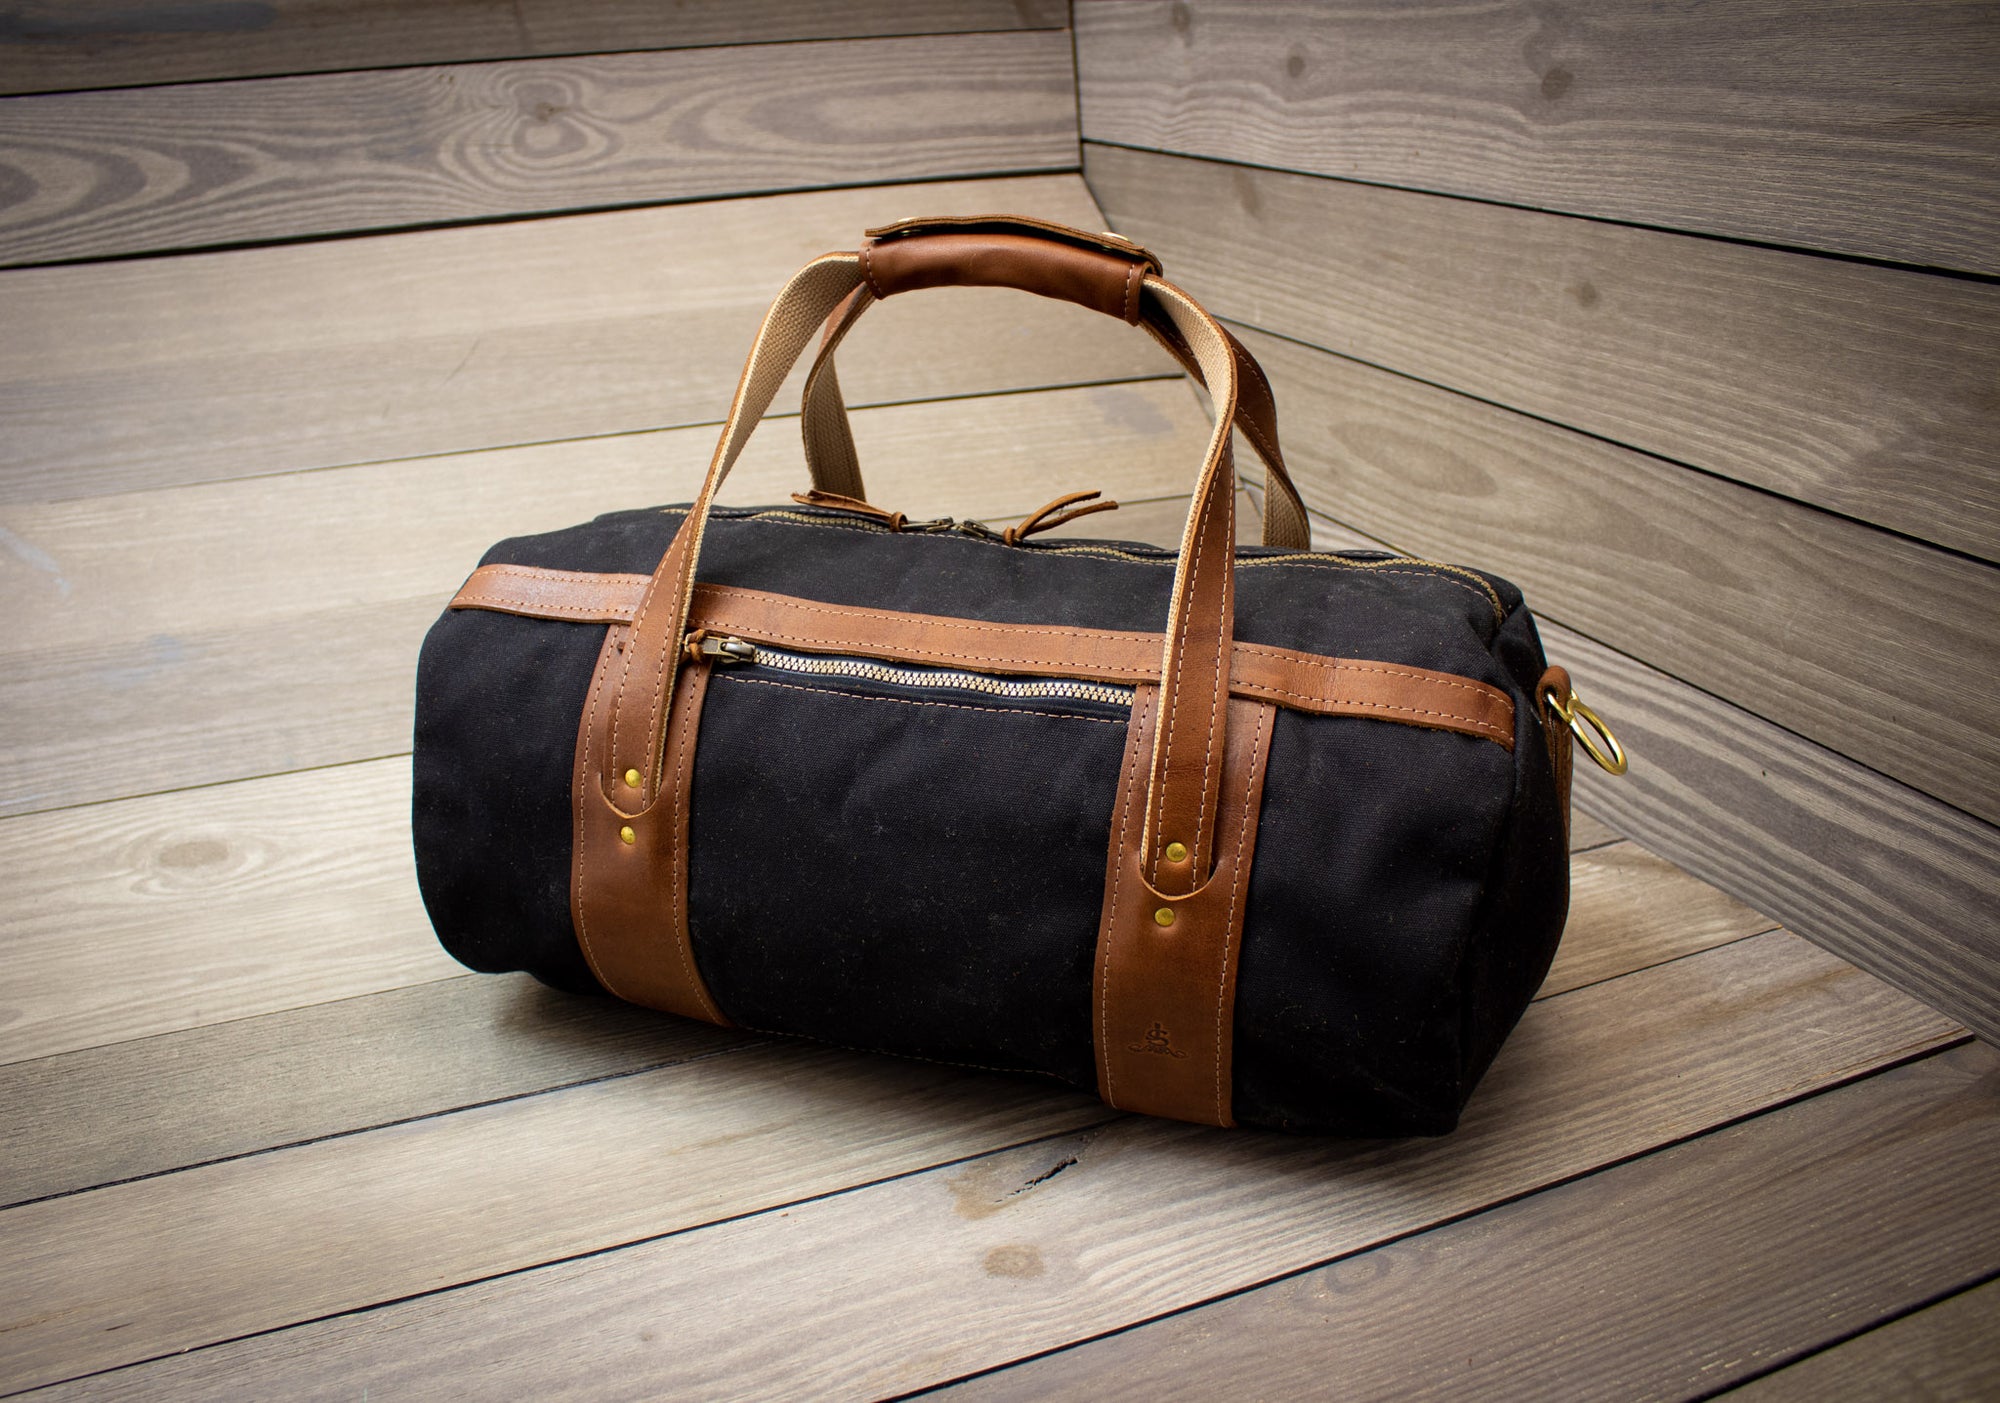 #1 Rated Men's Weekend Bag - Leather and Canvas Duffel Bag - Steurer ...